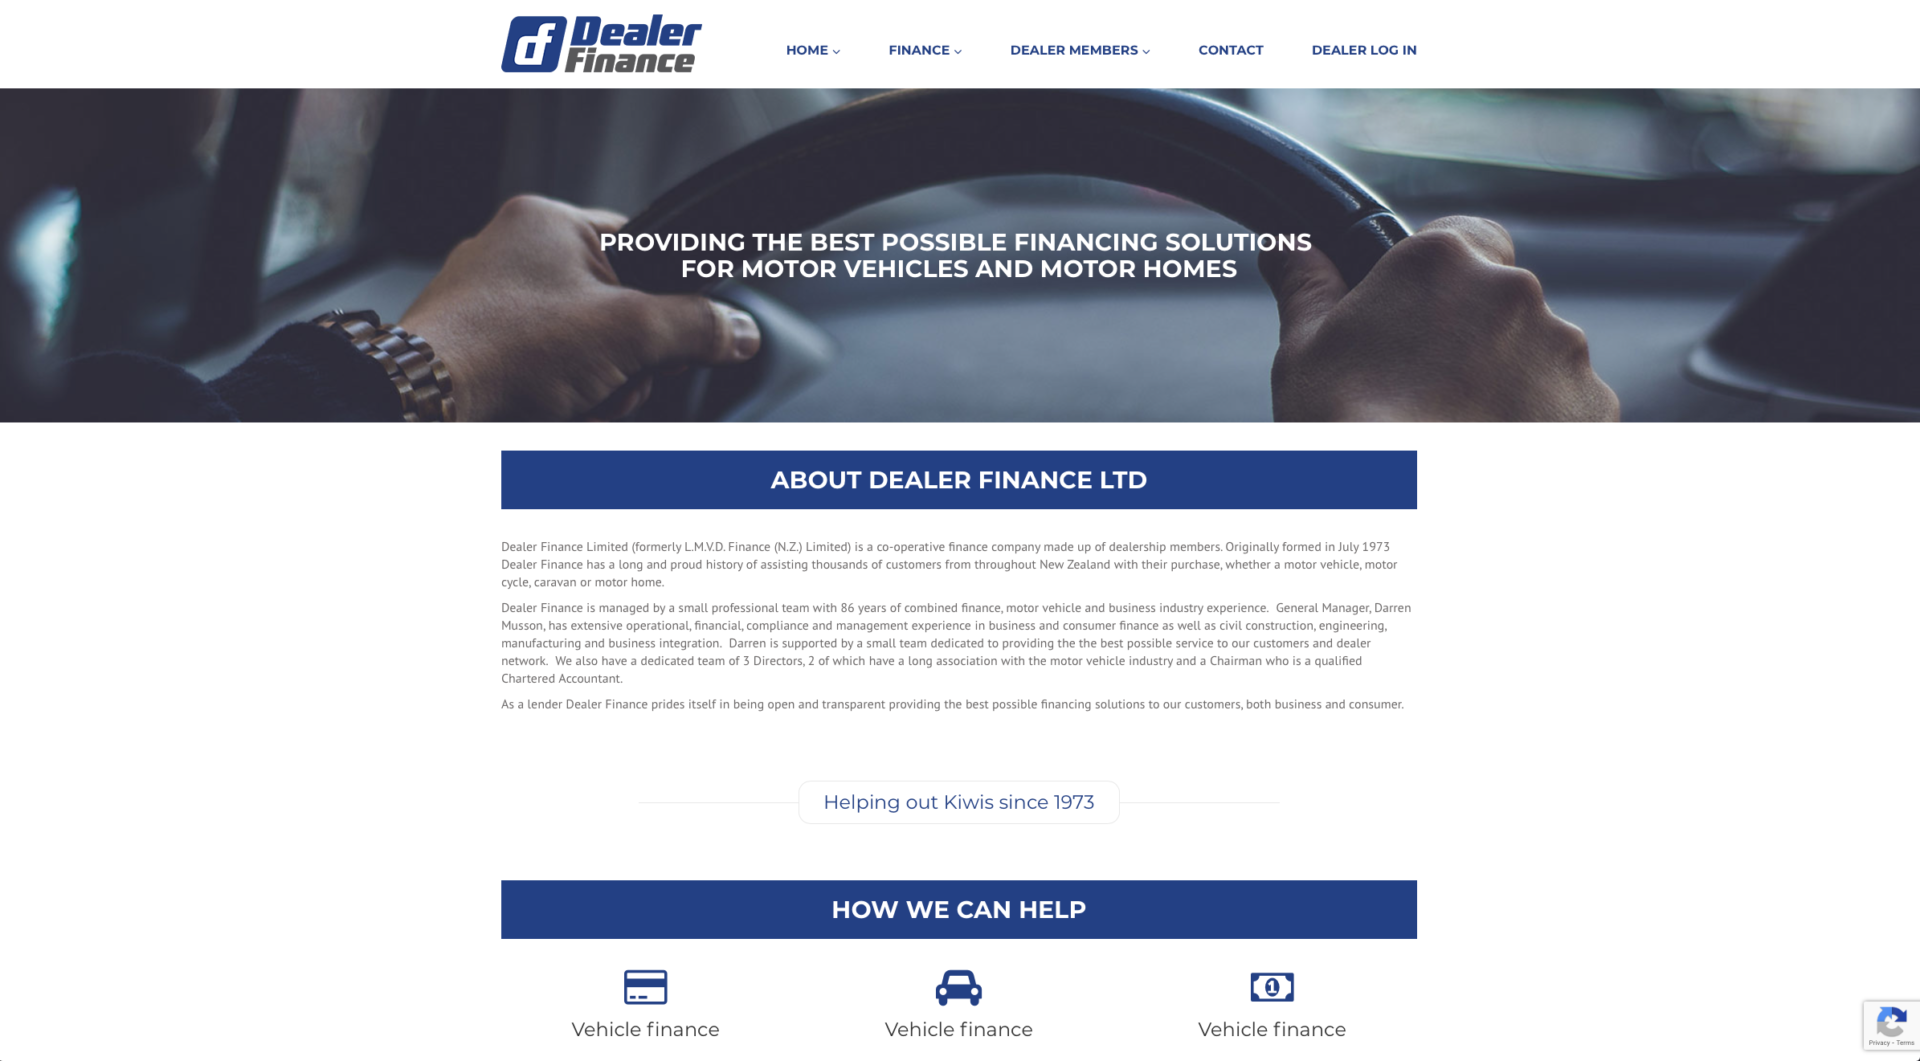 Dealer Finance (DF) New Zealand - website design and development with cool blue hues and colours symbolizing trust. A business based in Ashburton and Christchurch, Canterbury This is WordPress front end and a dealer portal back end